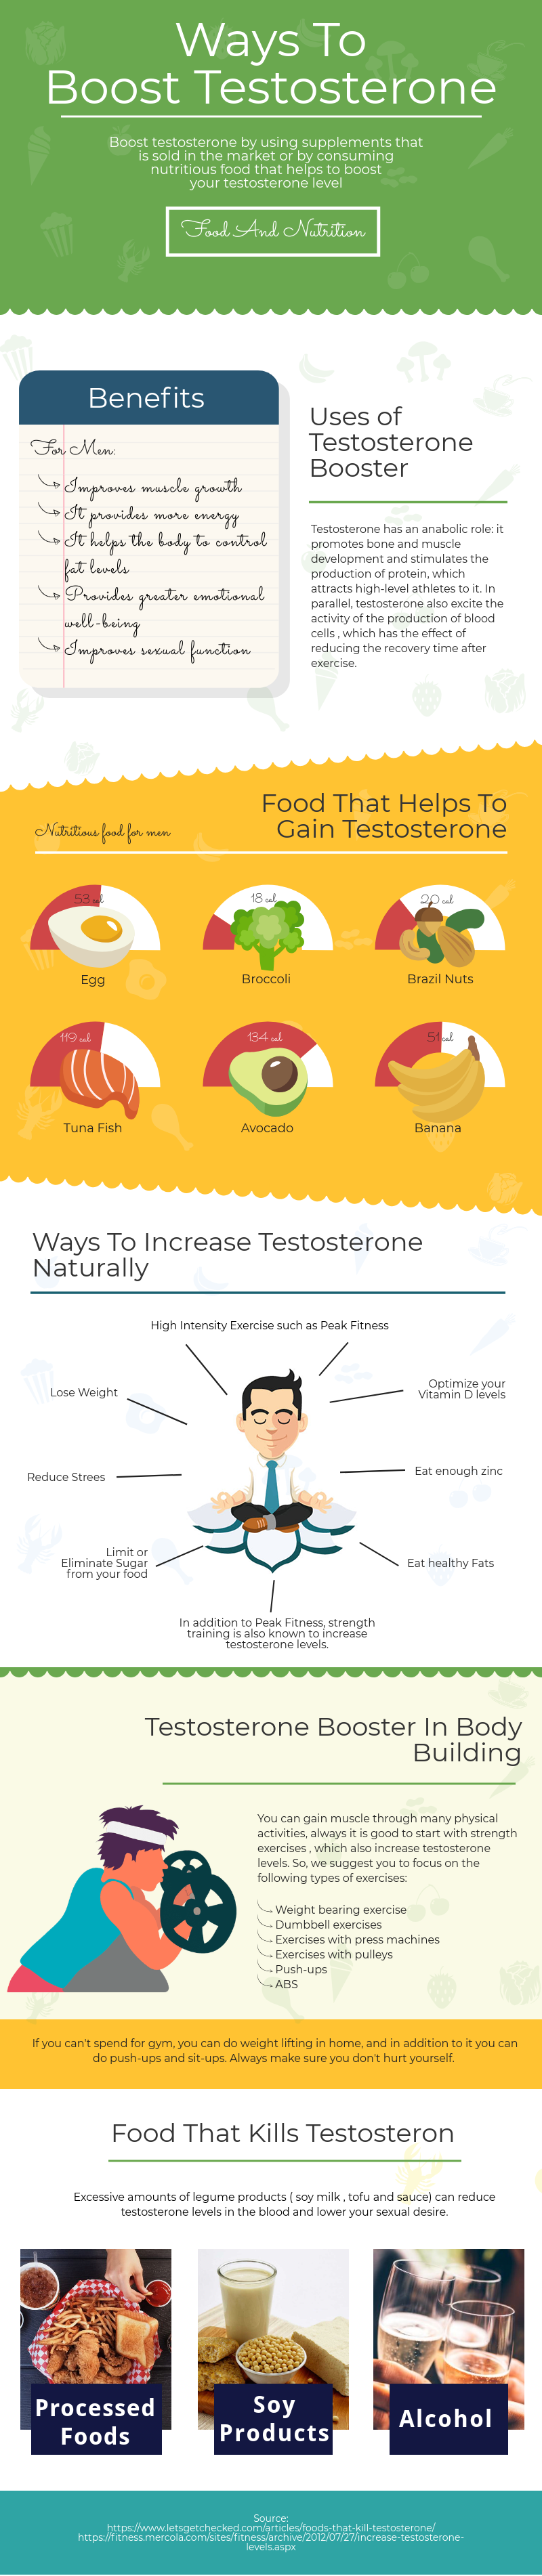 9 Foods That Increase Testosterone Naturally [Infographic]